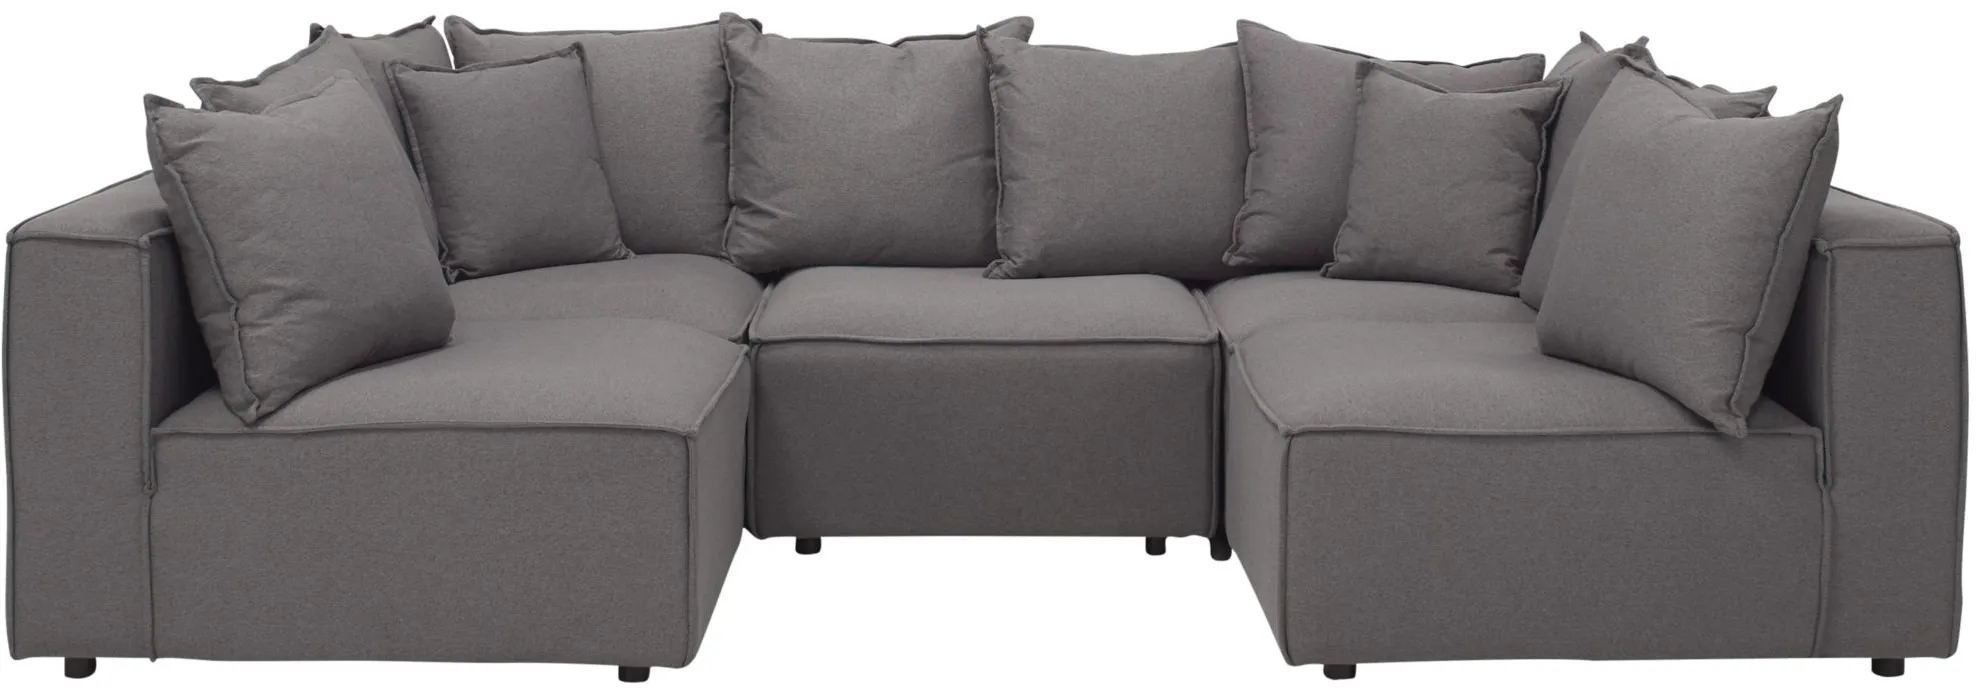 Loris Chenille 5-pc. Pit Sectional in Gray by Aria Designs